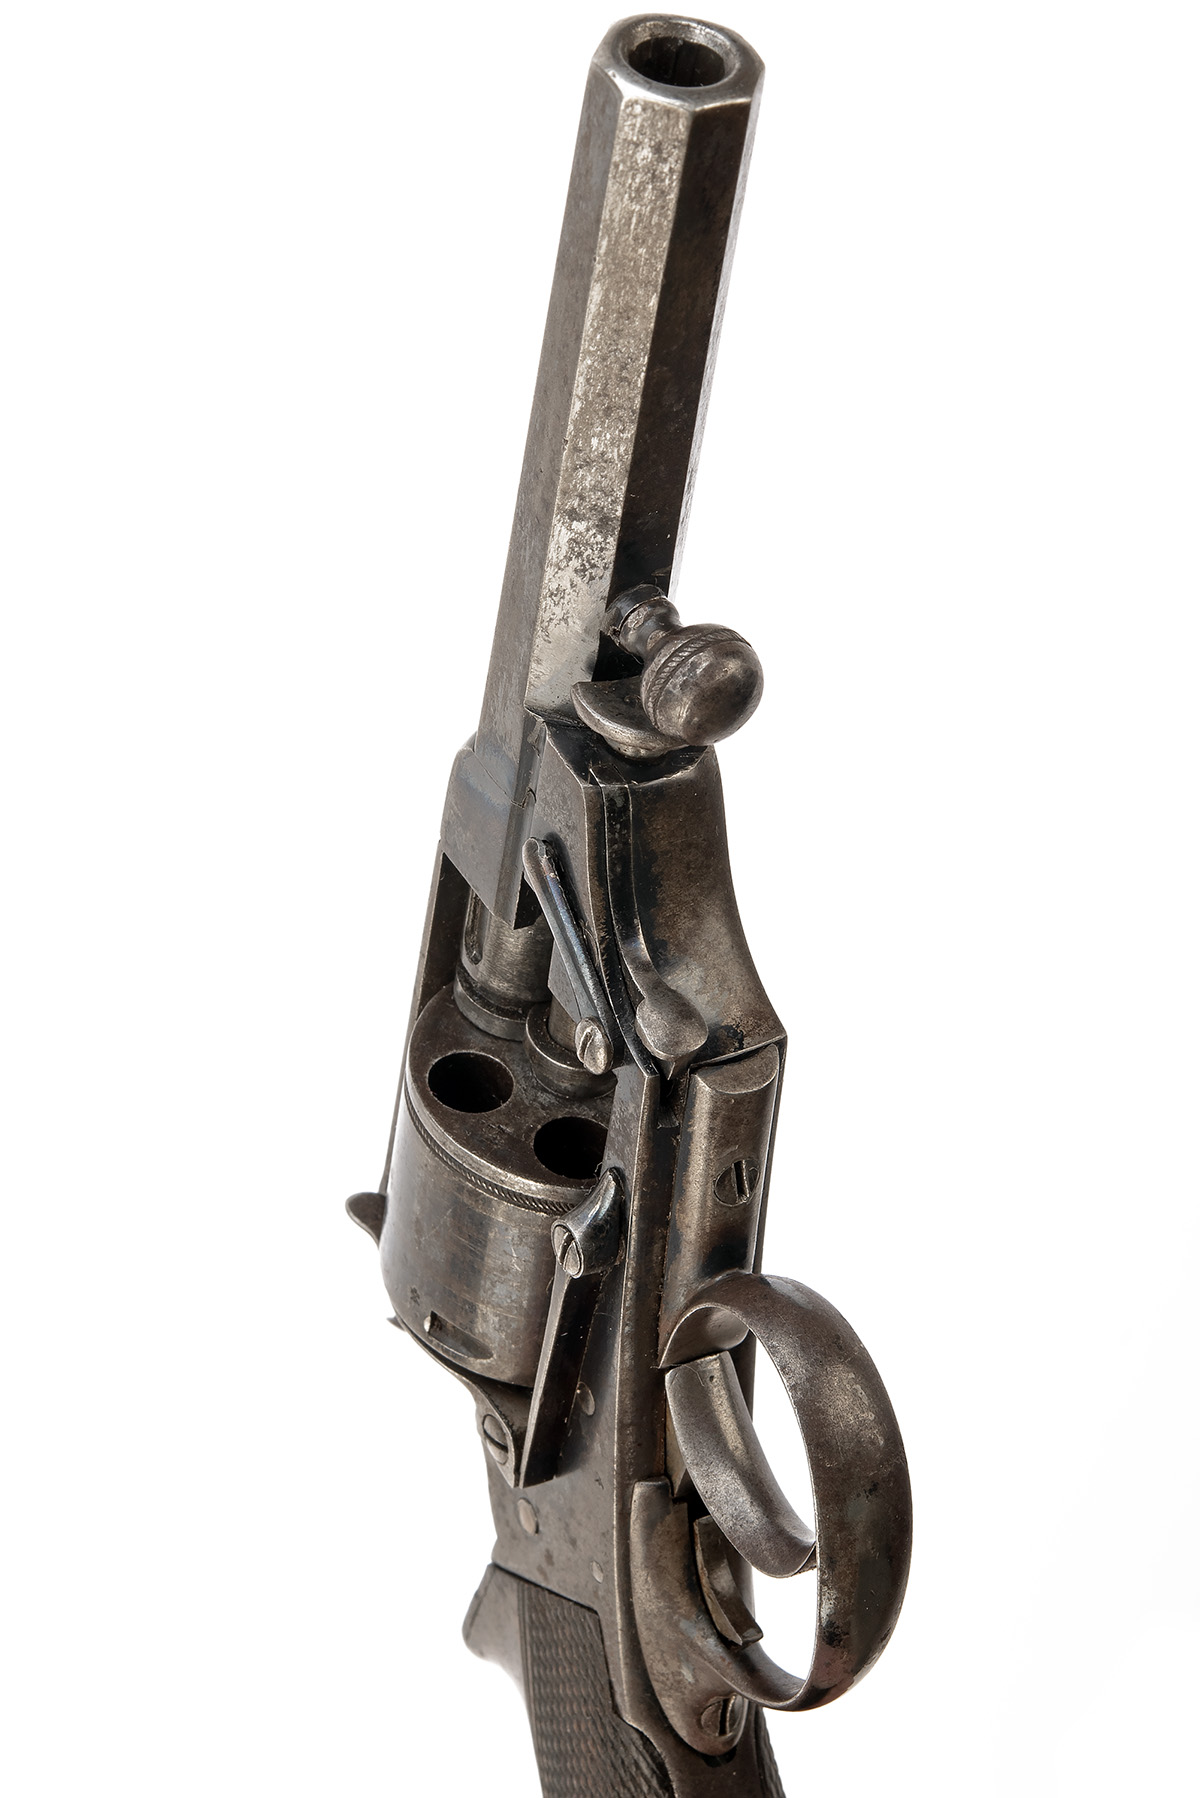 A SCARCE .320 (S/R) THOMAS'S PATENT POCKET REVOLVER, serial no. 373, probably by Tipping & Lawden of - Image 4 of 6